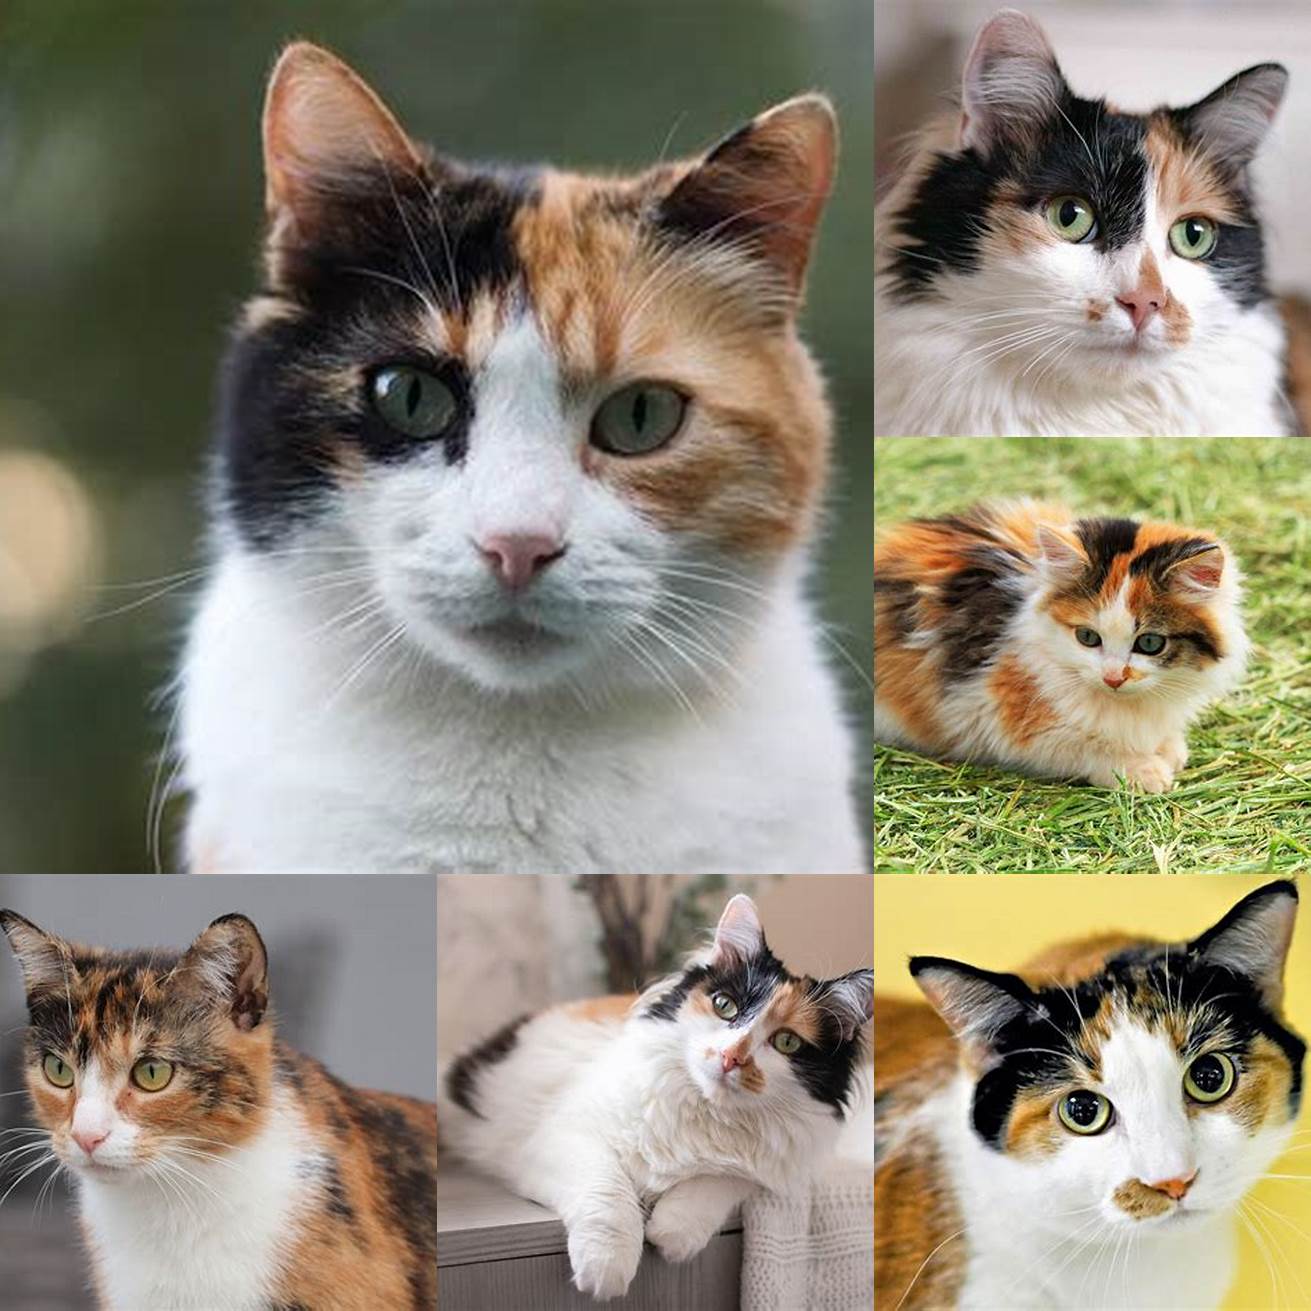 Are calico cats a specific breed